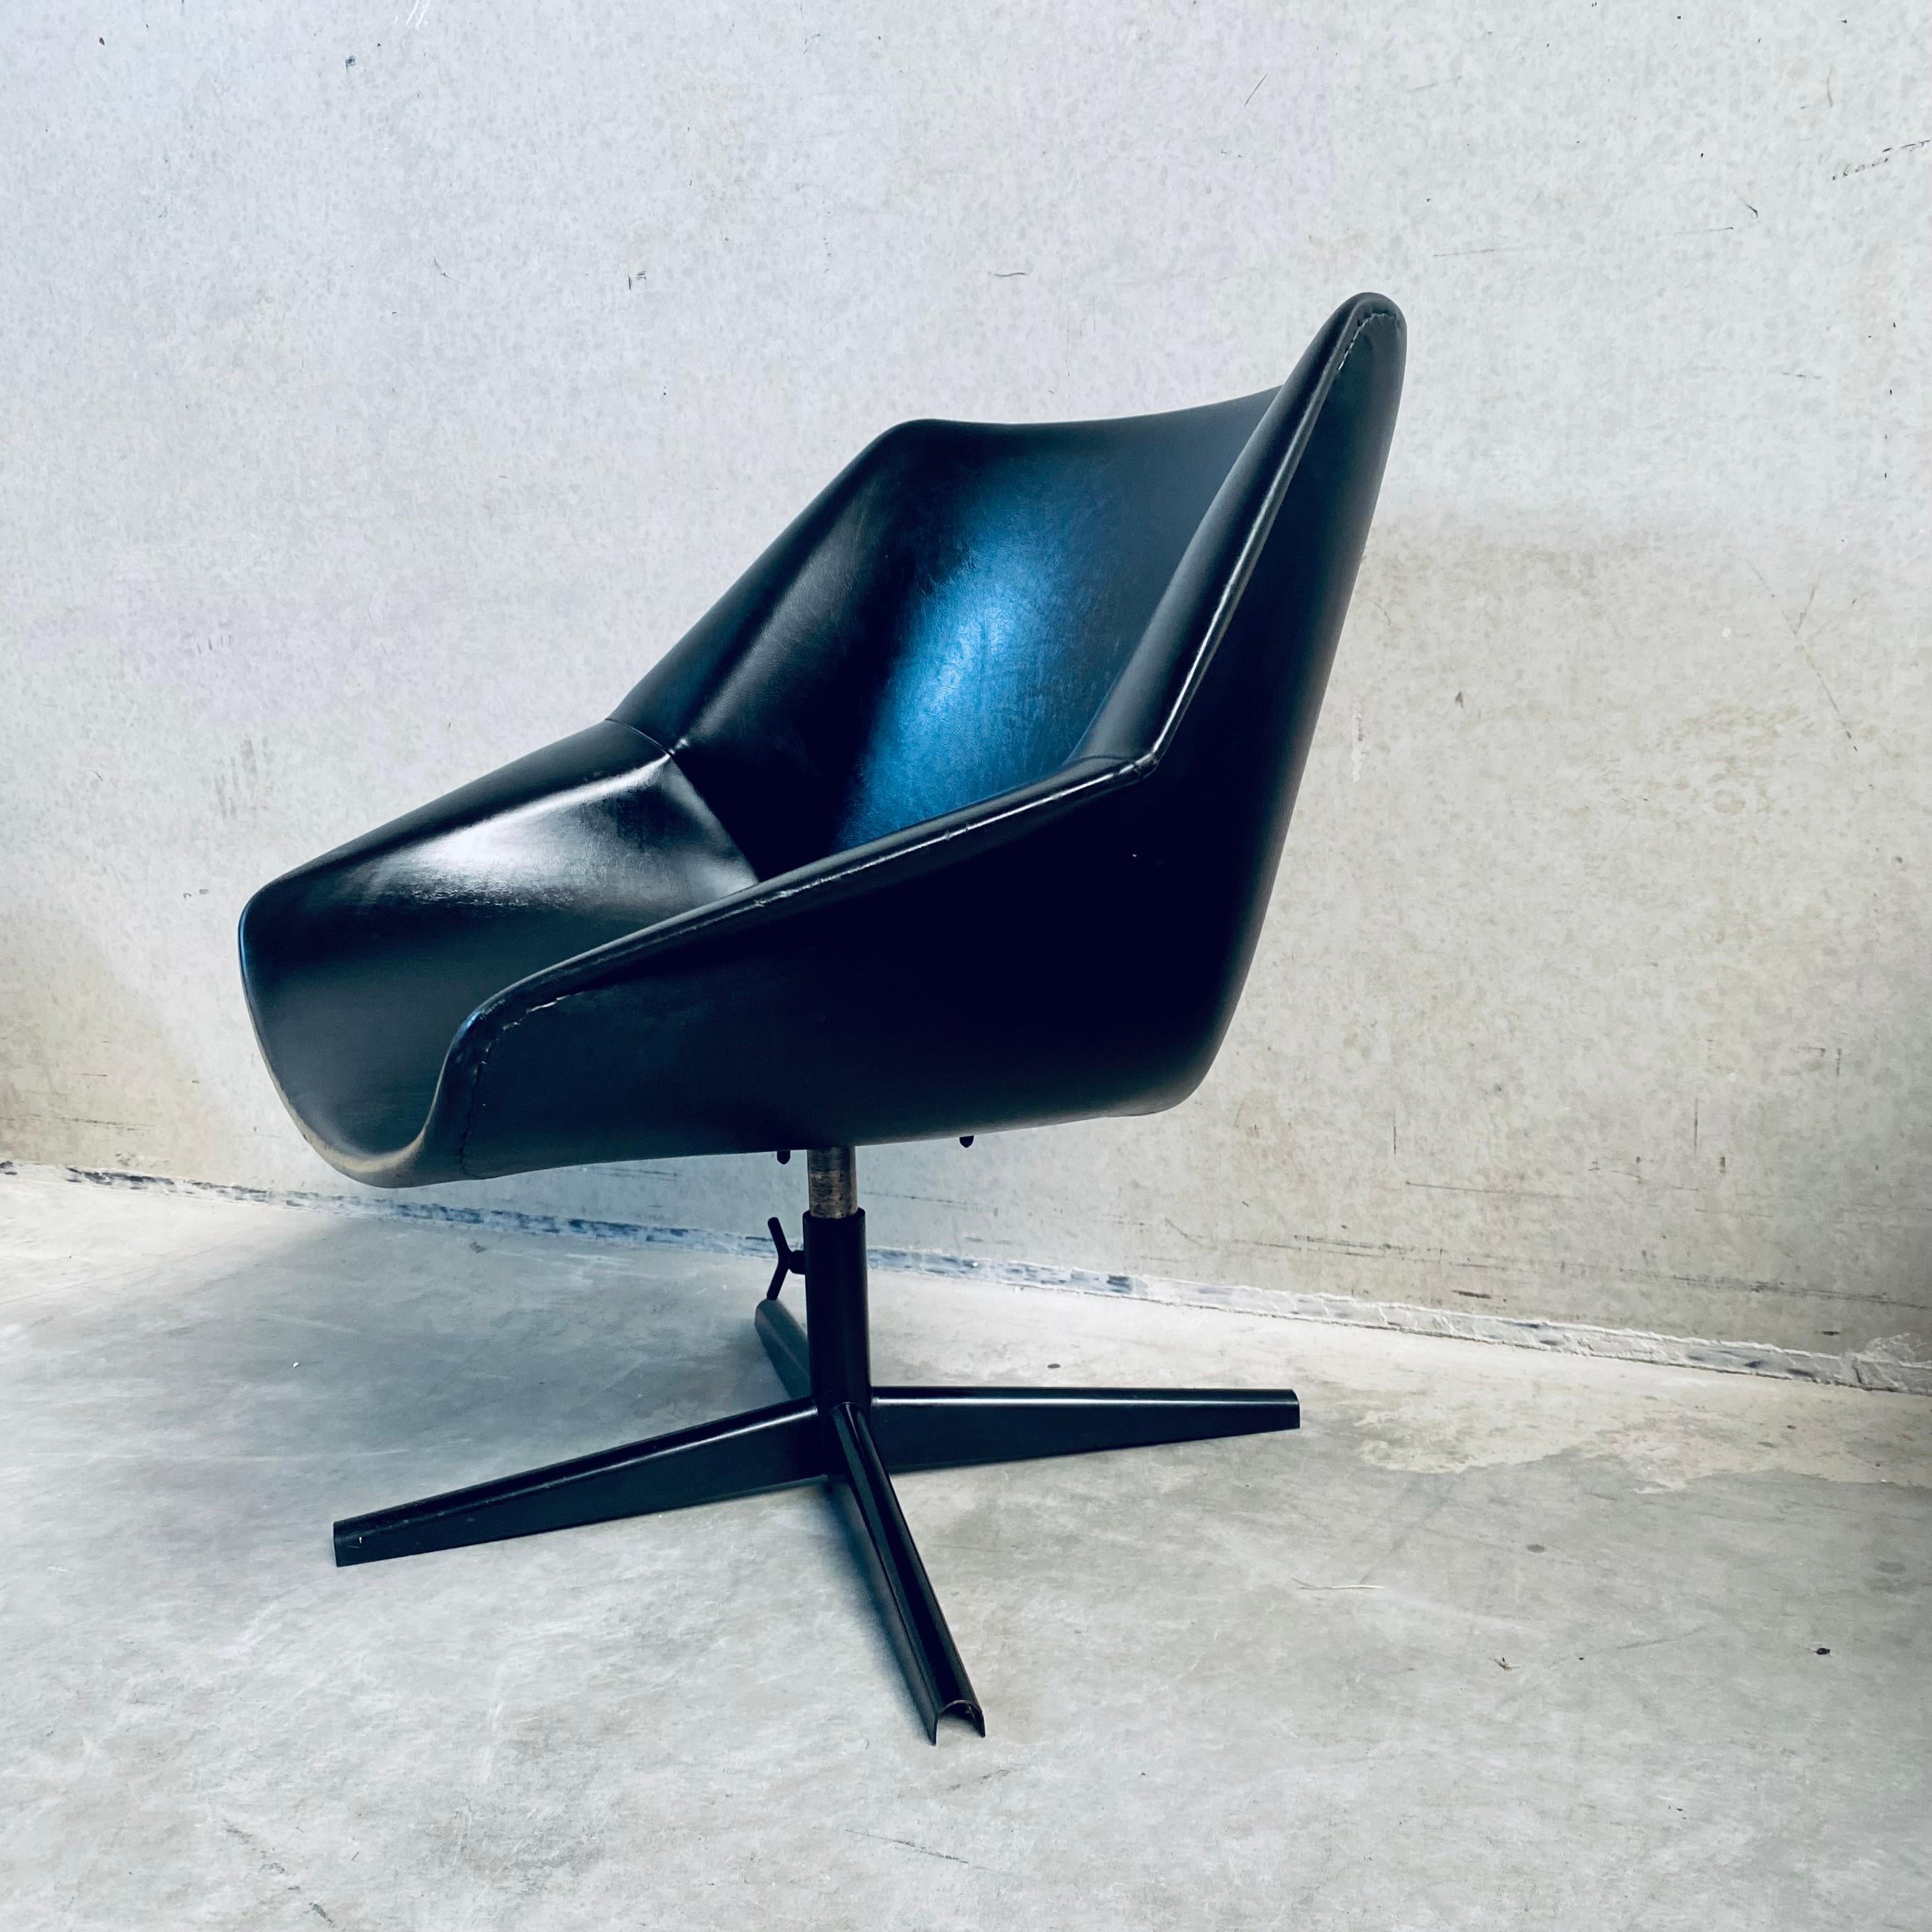 Experience timeless sophistication with the iconic Mid-Century Pastoe FM08 Swiffle chair, a masterpiece of design by Cees Braakman dating back to 1959. Crafted by the visionary designer for Pastoe, this FM08 swivel chair seamlessly blends form and